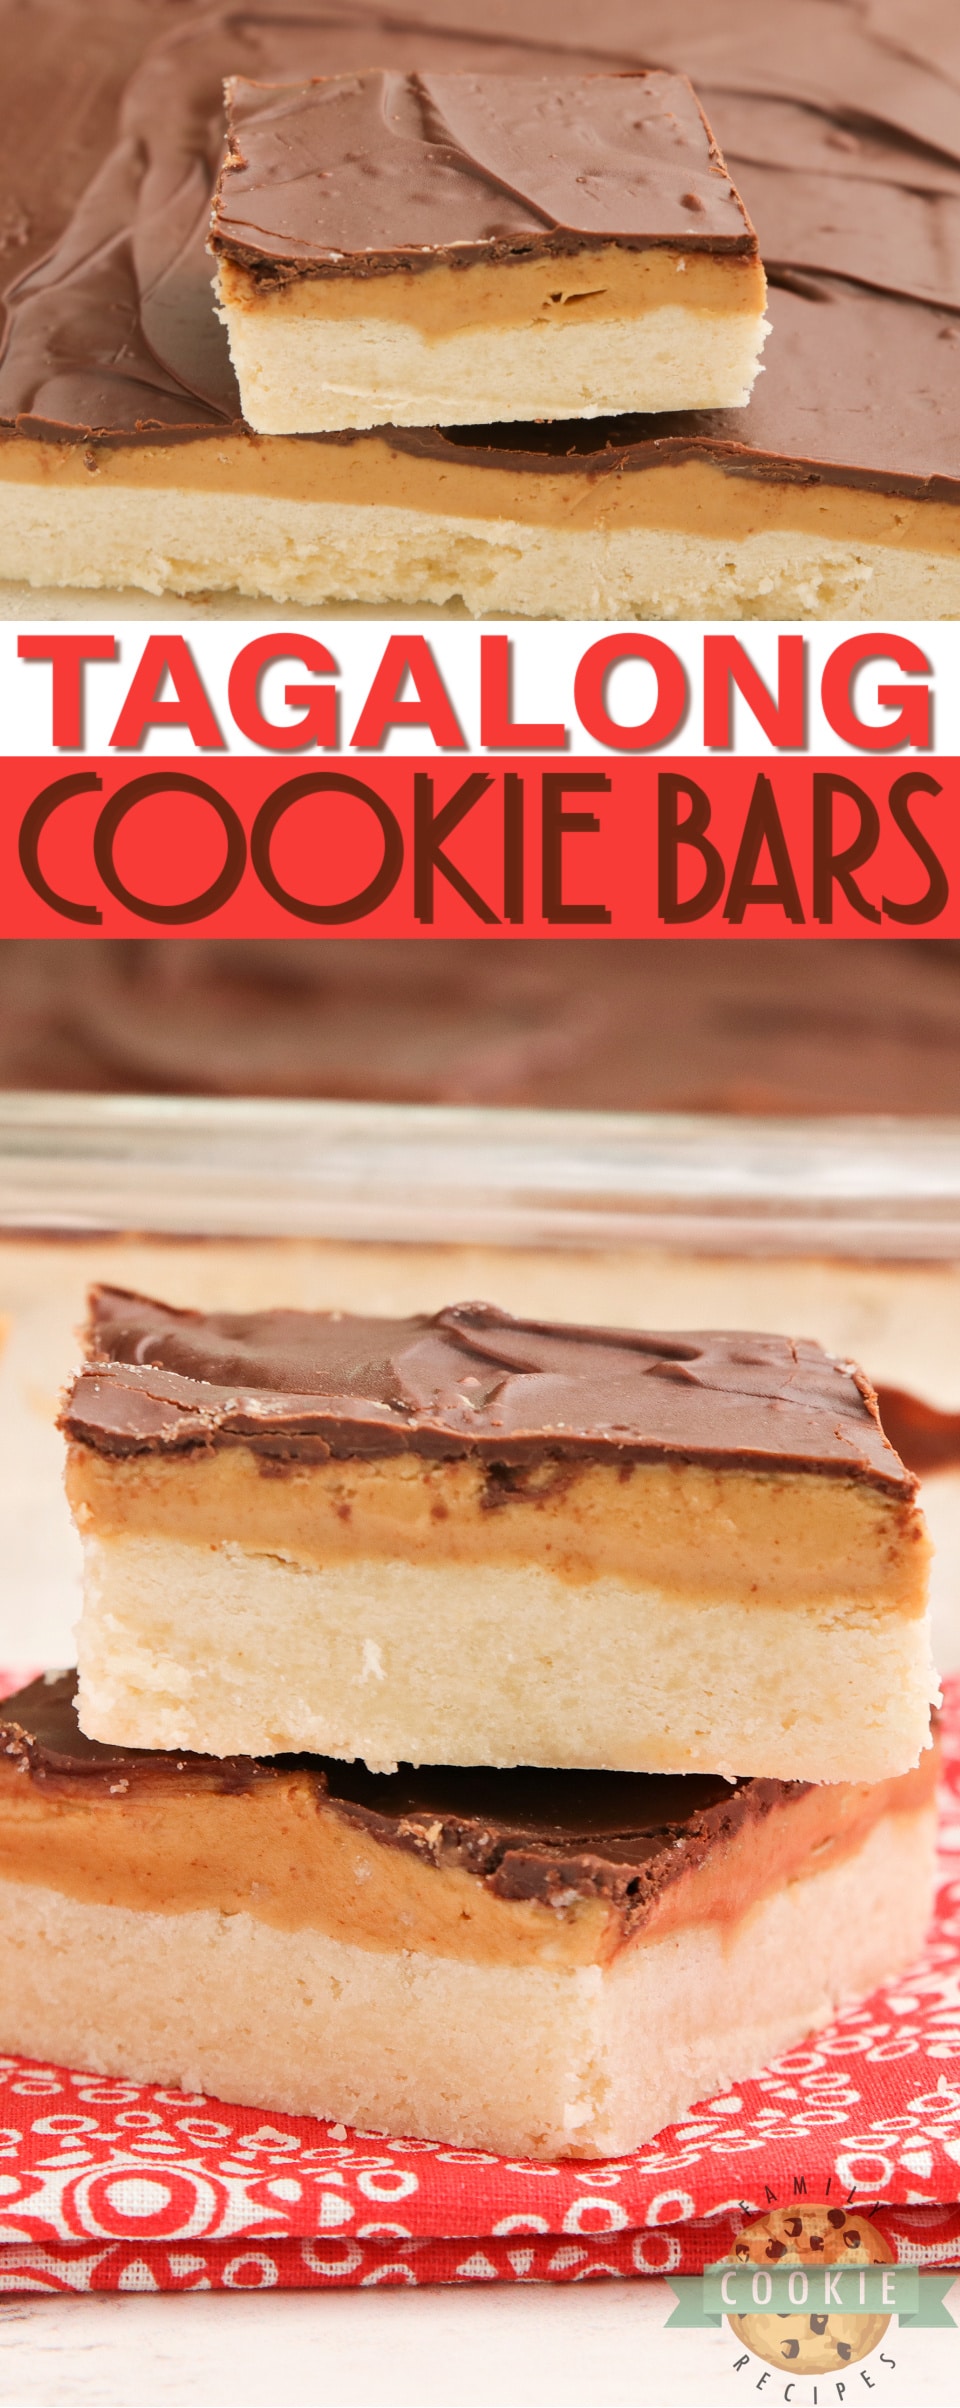 Tagalong Cookie Bars made with a shortbread cookie crust with a peanut butter layer with chocolate on top. Simple to put together, and taste just like your favorite chocolate peanut butter Girl Scout cookies. via @buttergirls